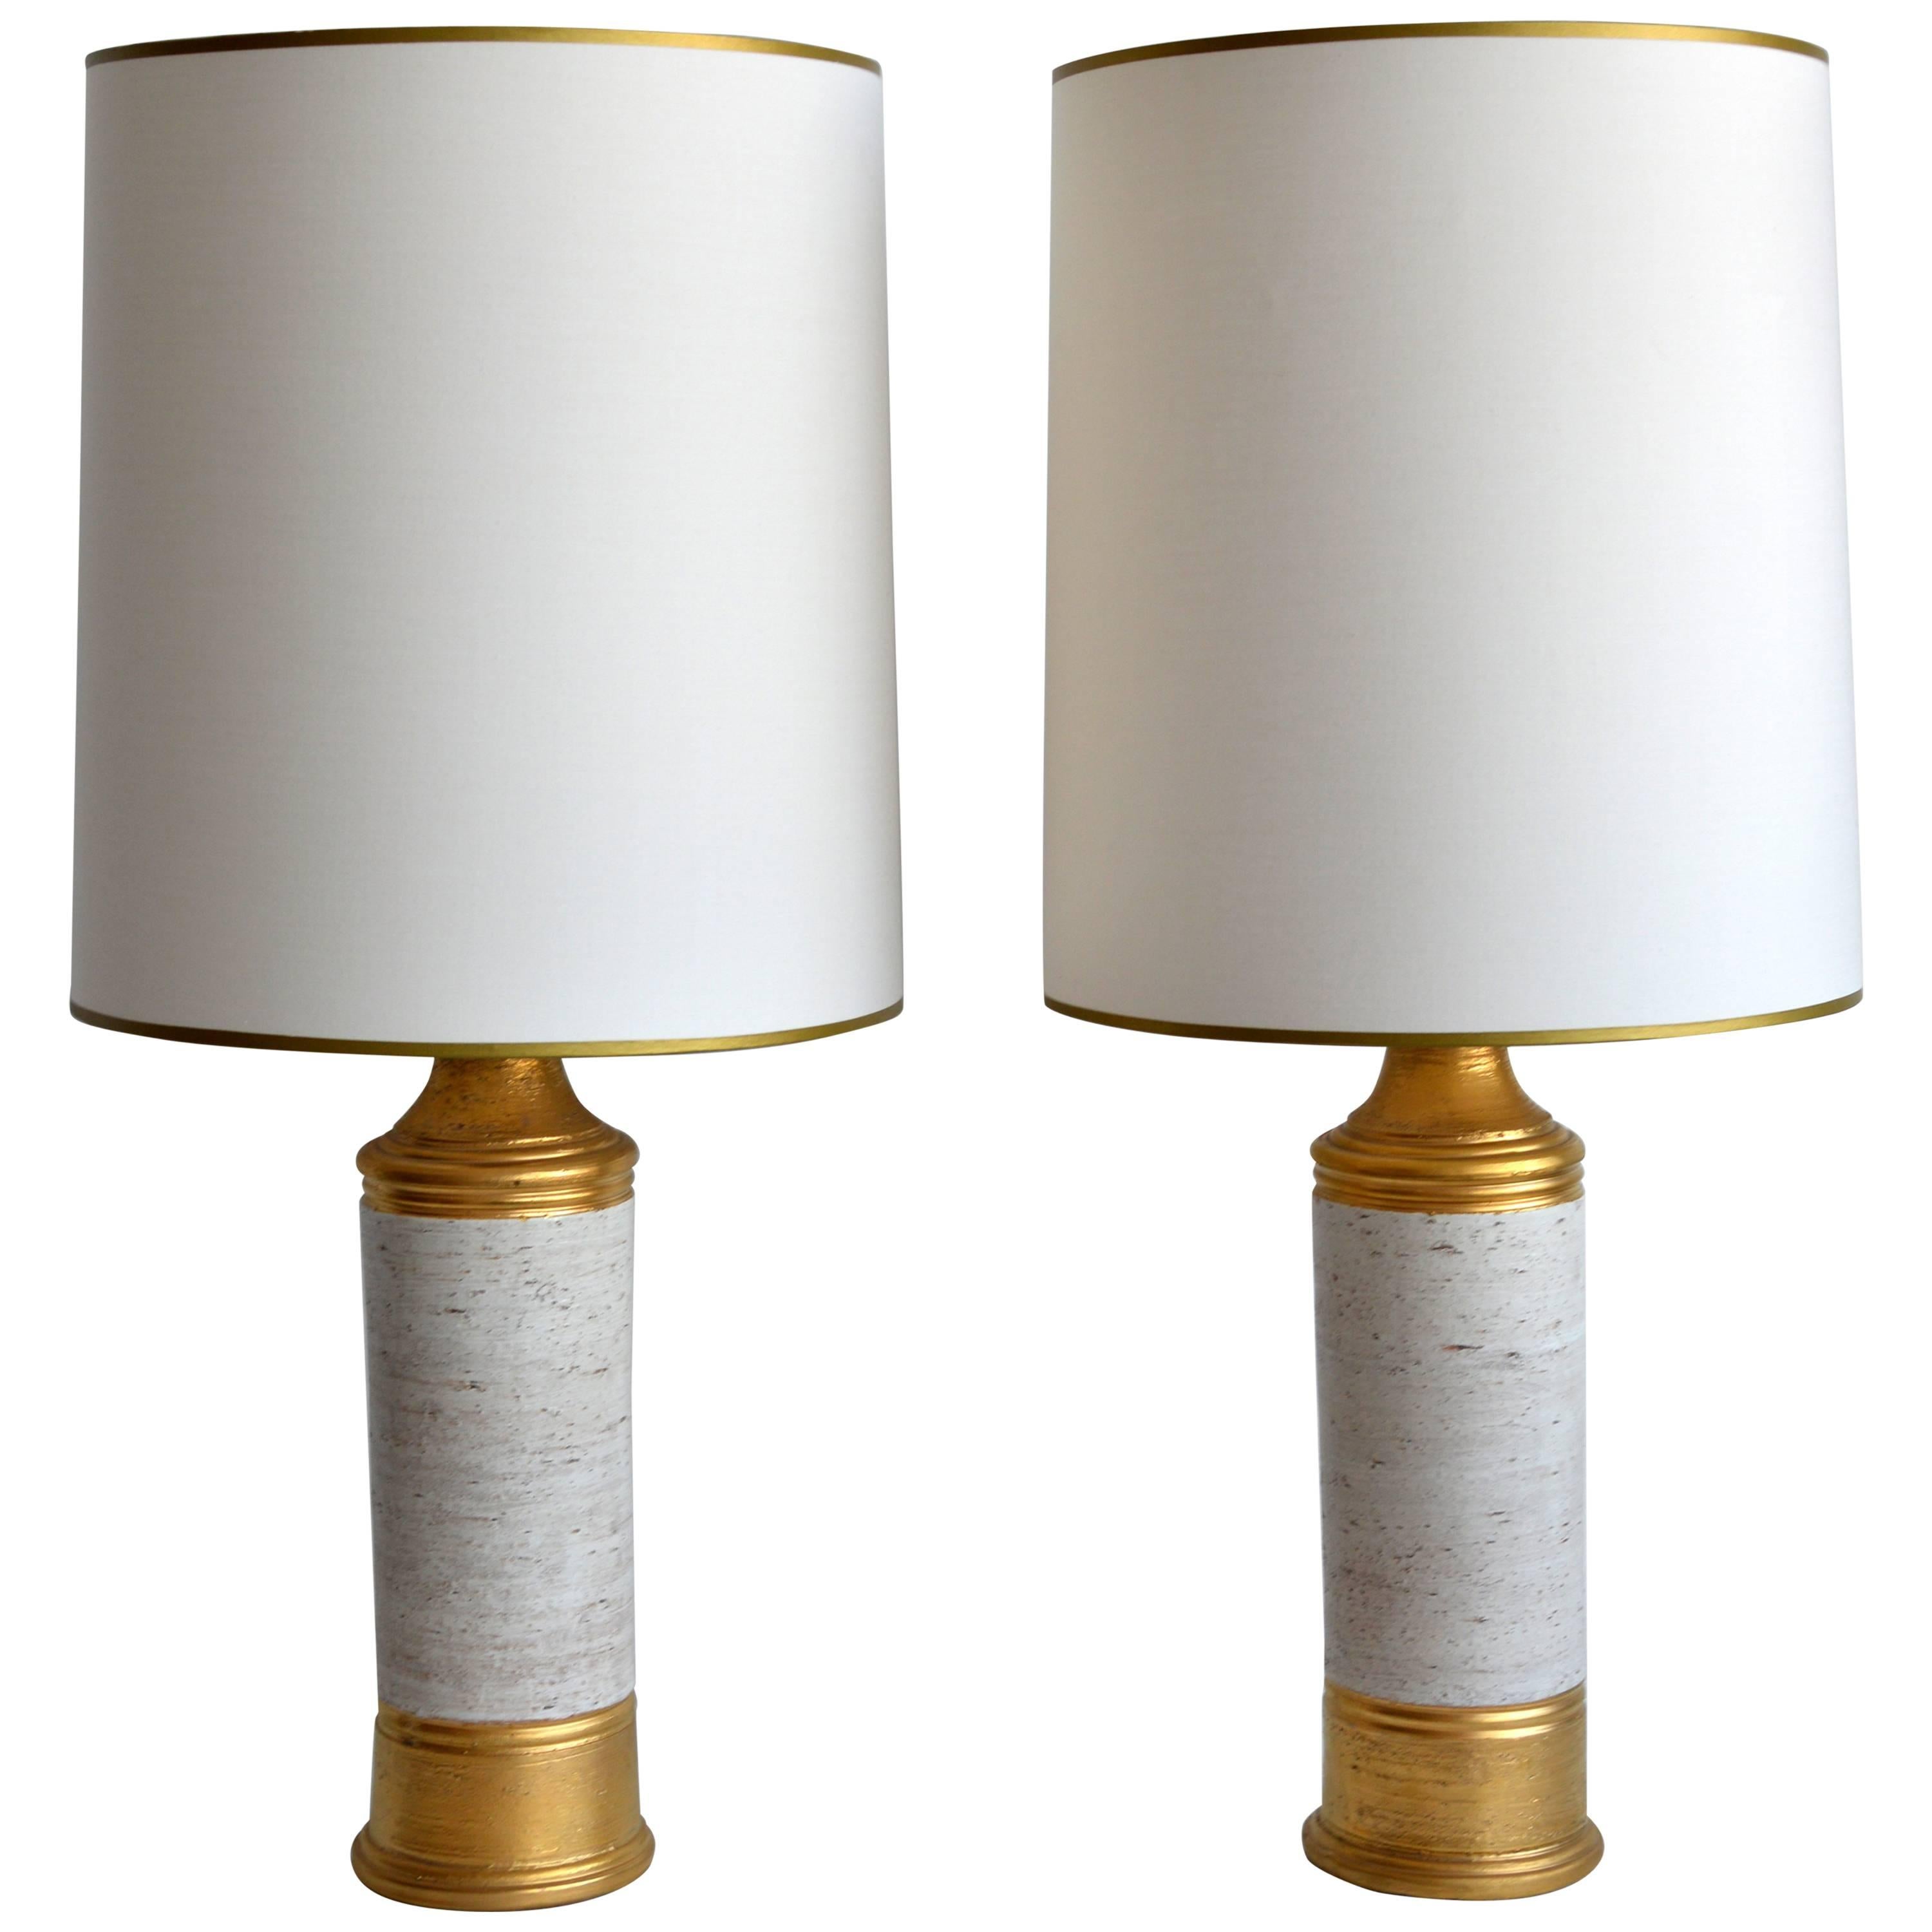 Vintage Pair of Bitossi for Bergboms Table Lamps, 1960's, Swedish